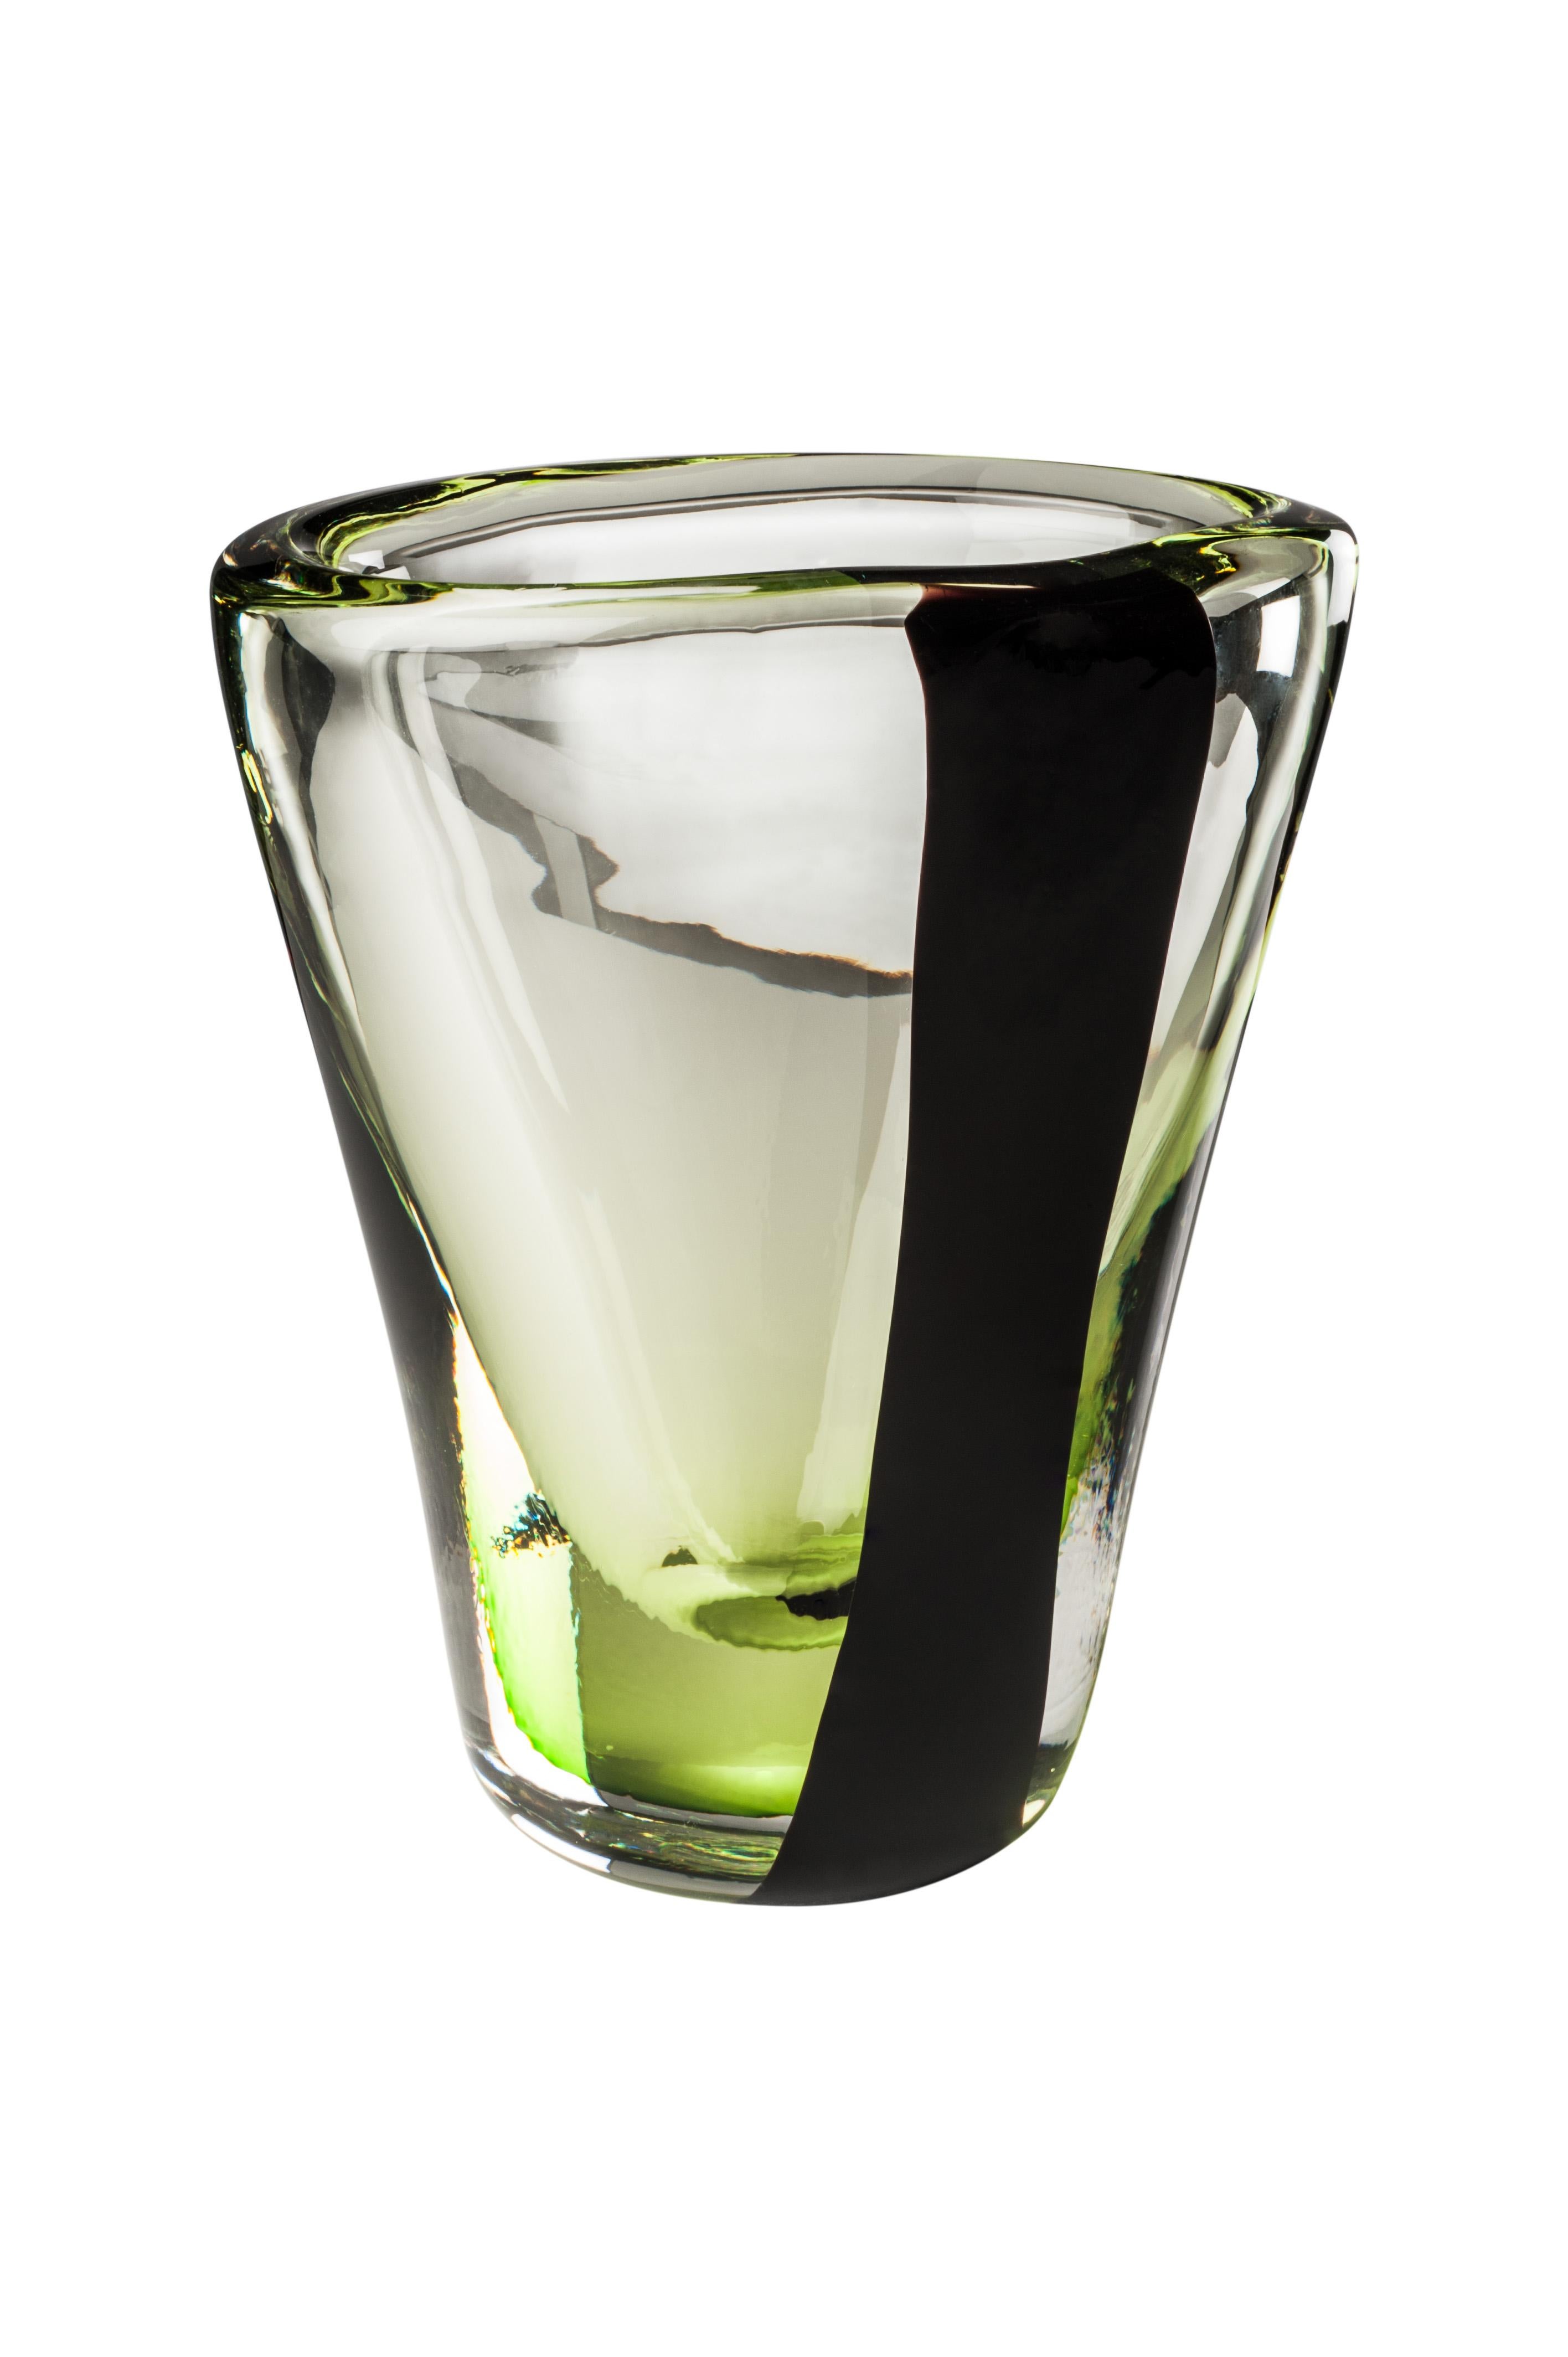 Venini glass vase in crystal and grass green with black decoration designed by Peter Marino in 2017. Perfect for indoor home decor as container or statement piece for any room. Also available in other colors on 1stdibs. Limited edition of only 349